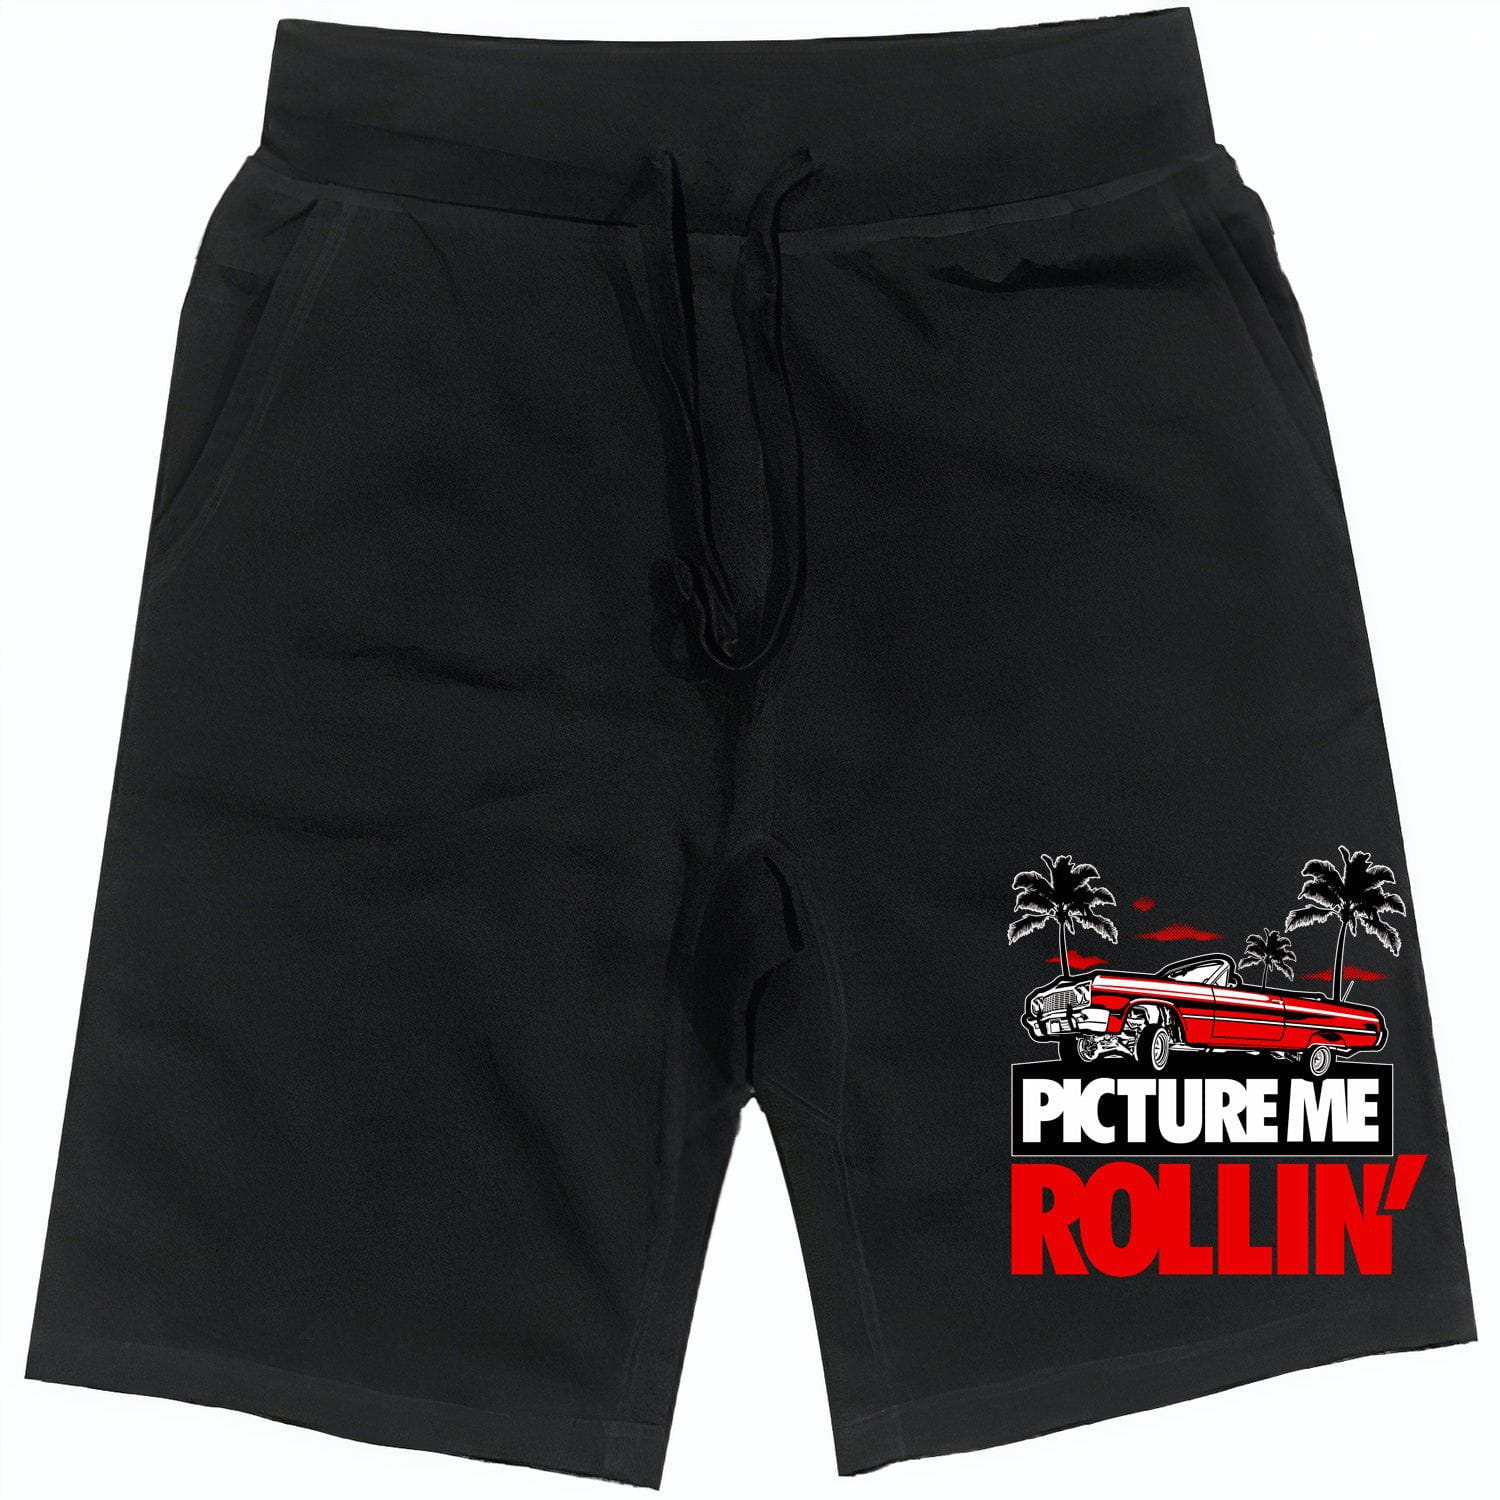 RED PICTURE ME ROLLIN : Black Cotton Terry Fleece Shorts